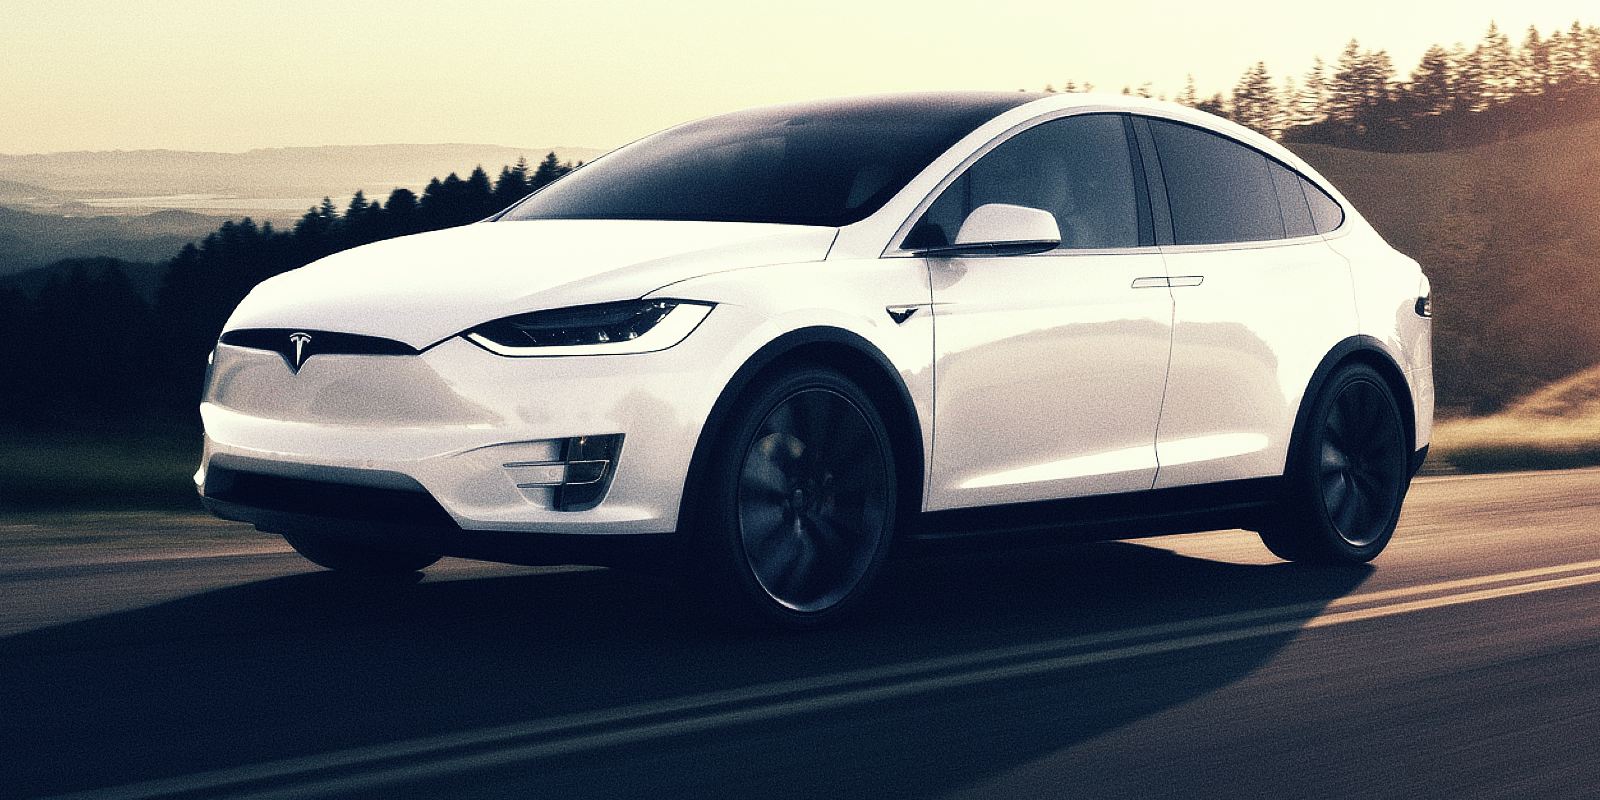 Tesla Model X key fobs could be hacked to steal cars, fix released